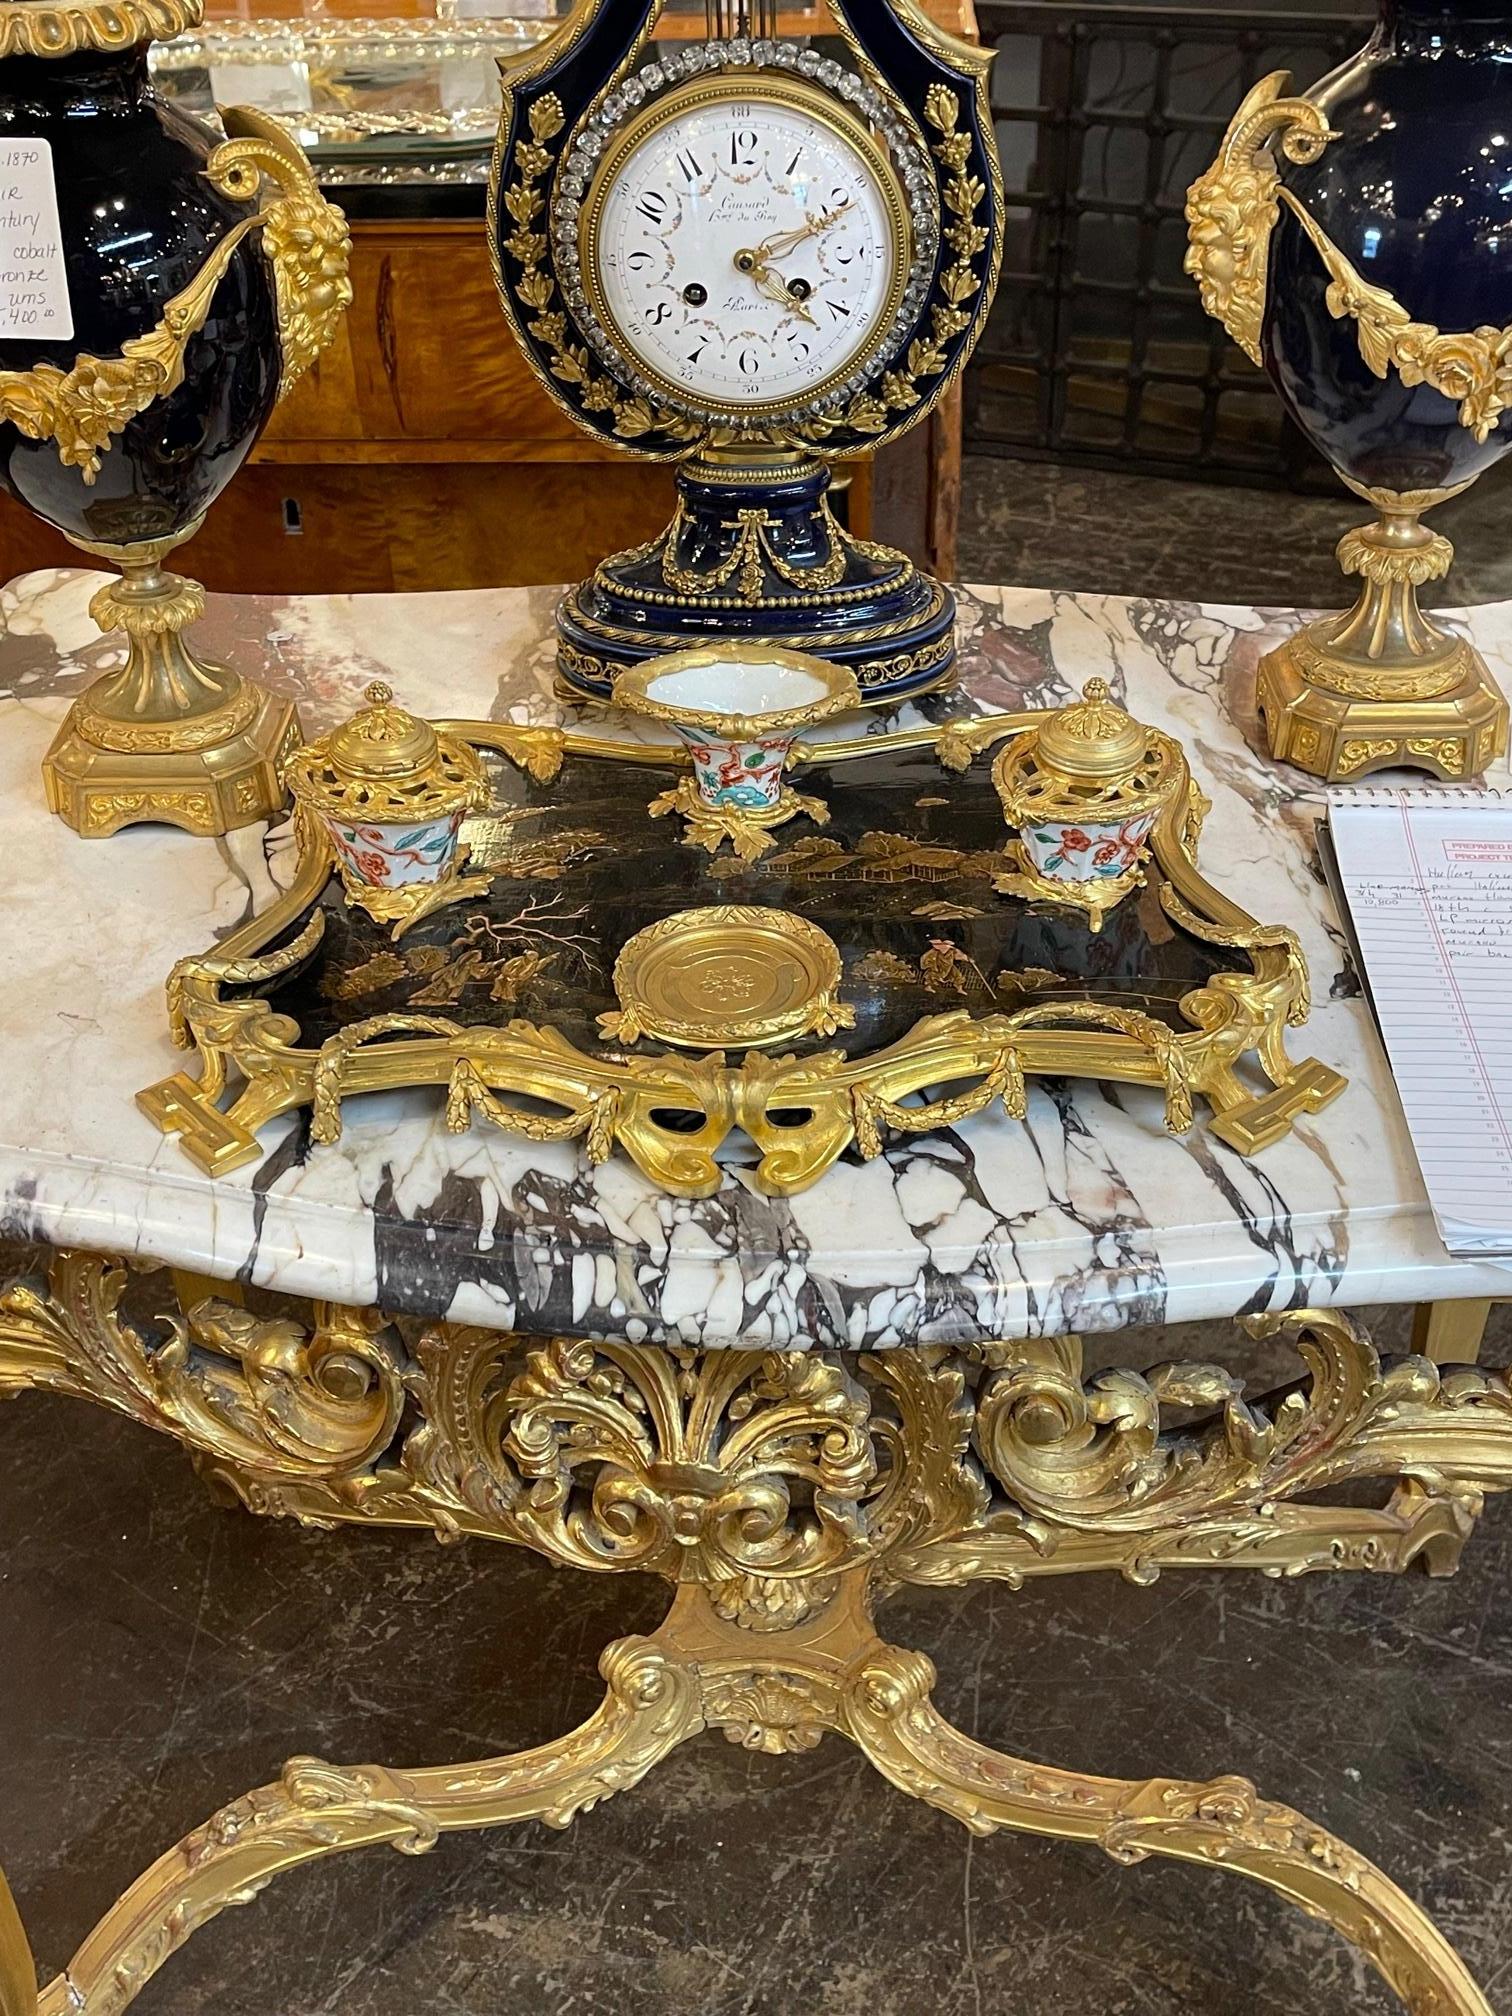 19th century French Louis XVI style chinoiserie and dore' bronze encrier. Beautiful piece to add to any writing desk. Sure to make a statement!